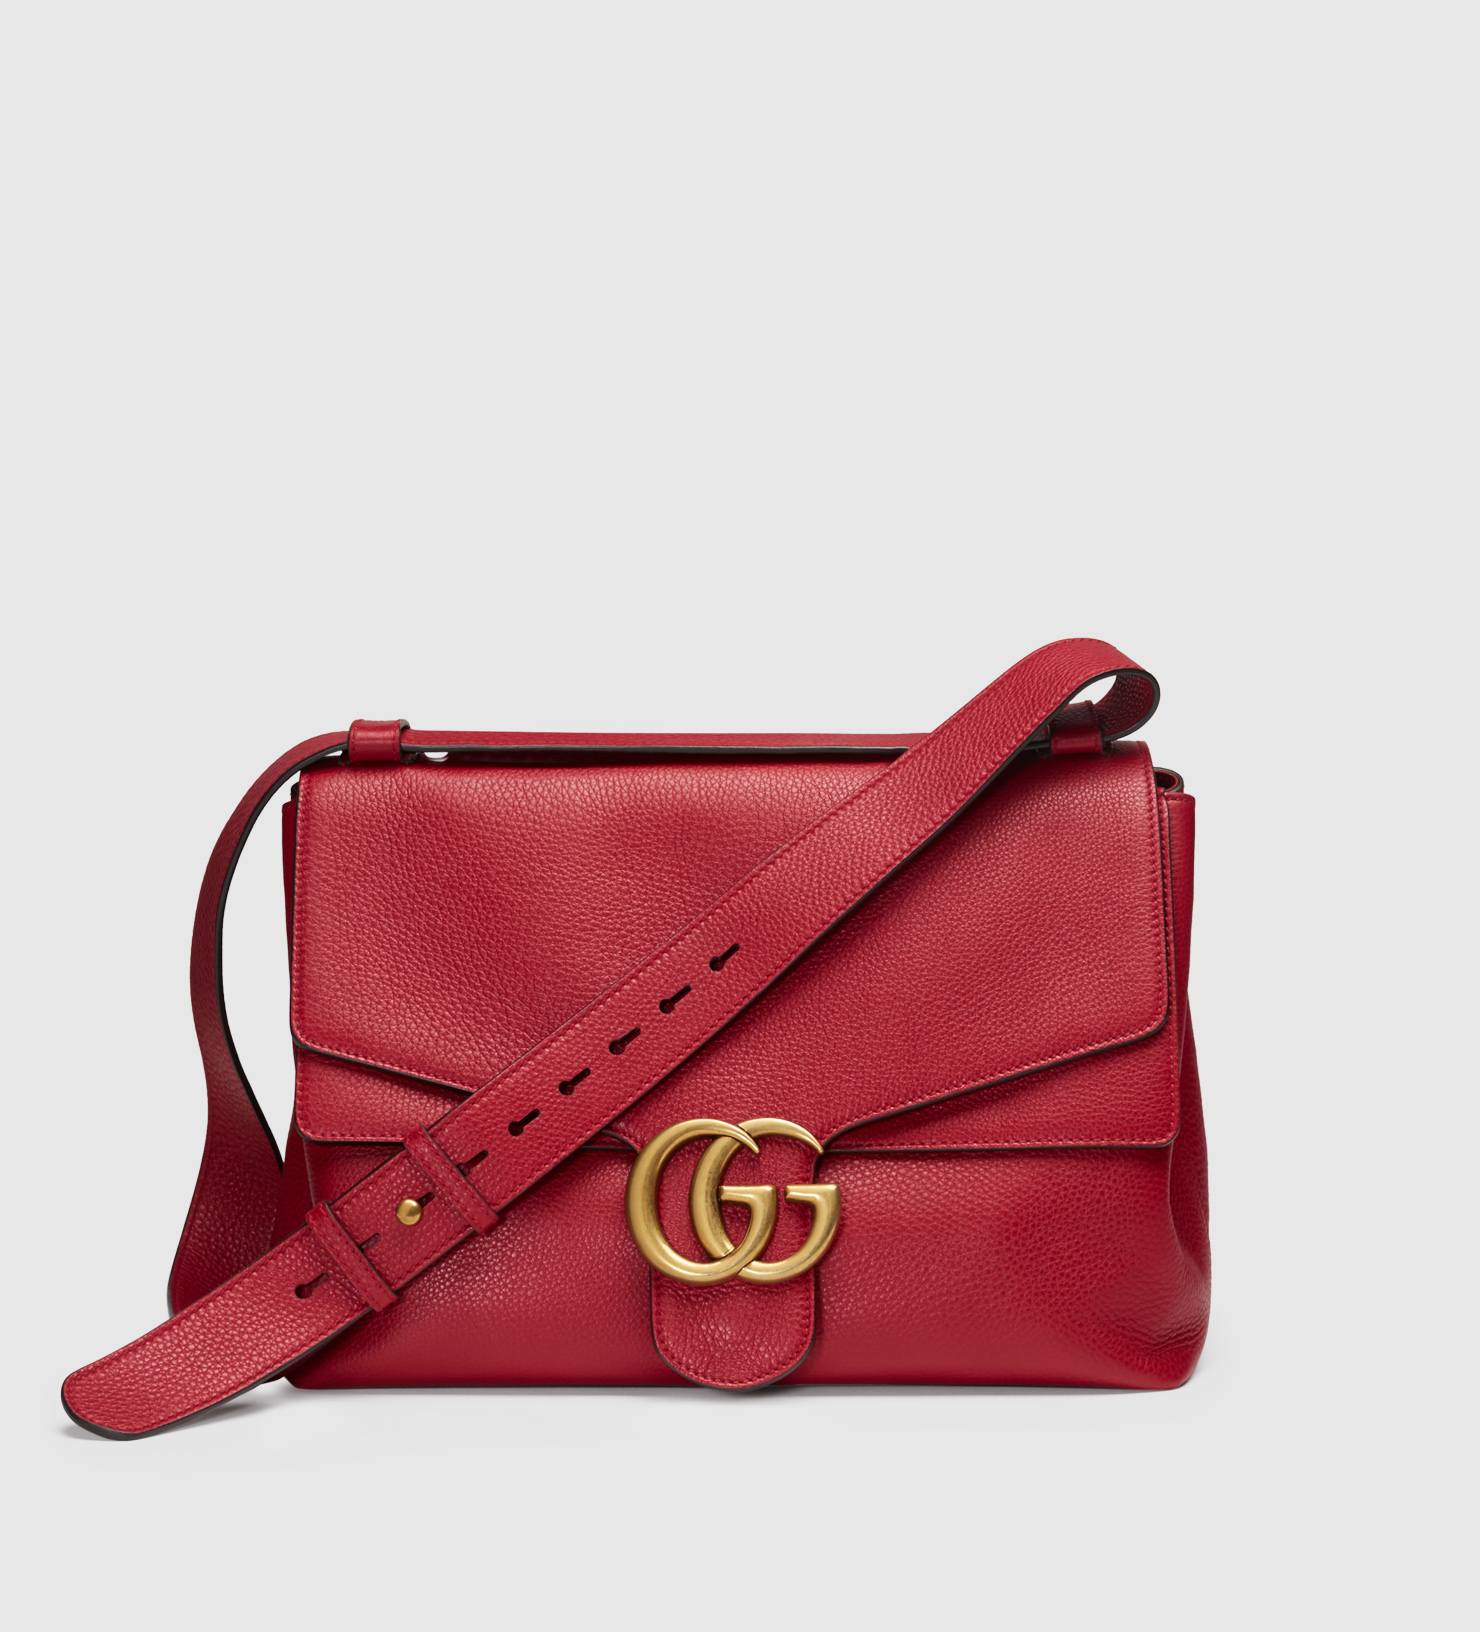 Gucci Gg Marmont Leather Shoulder Bag in Red | Lyst